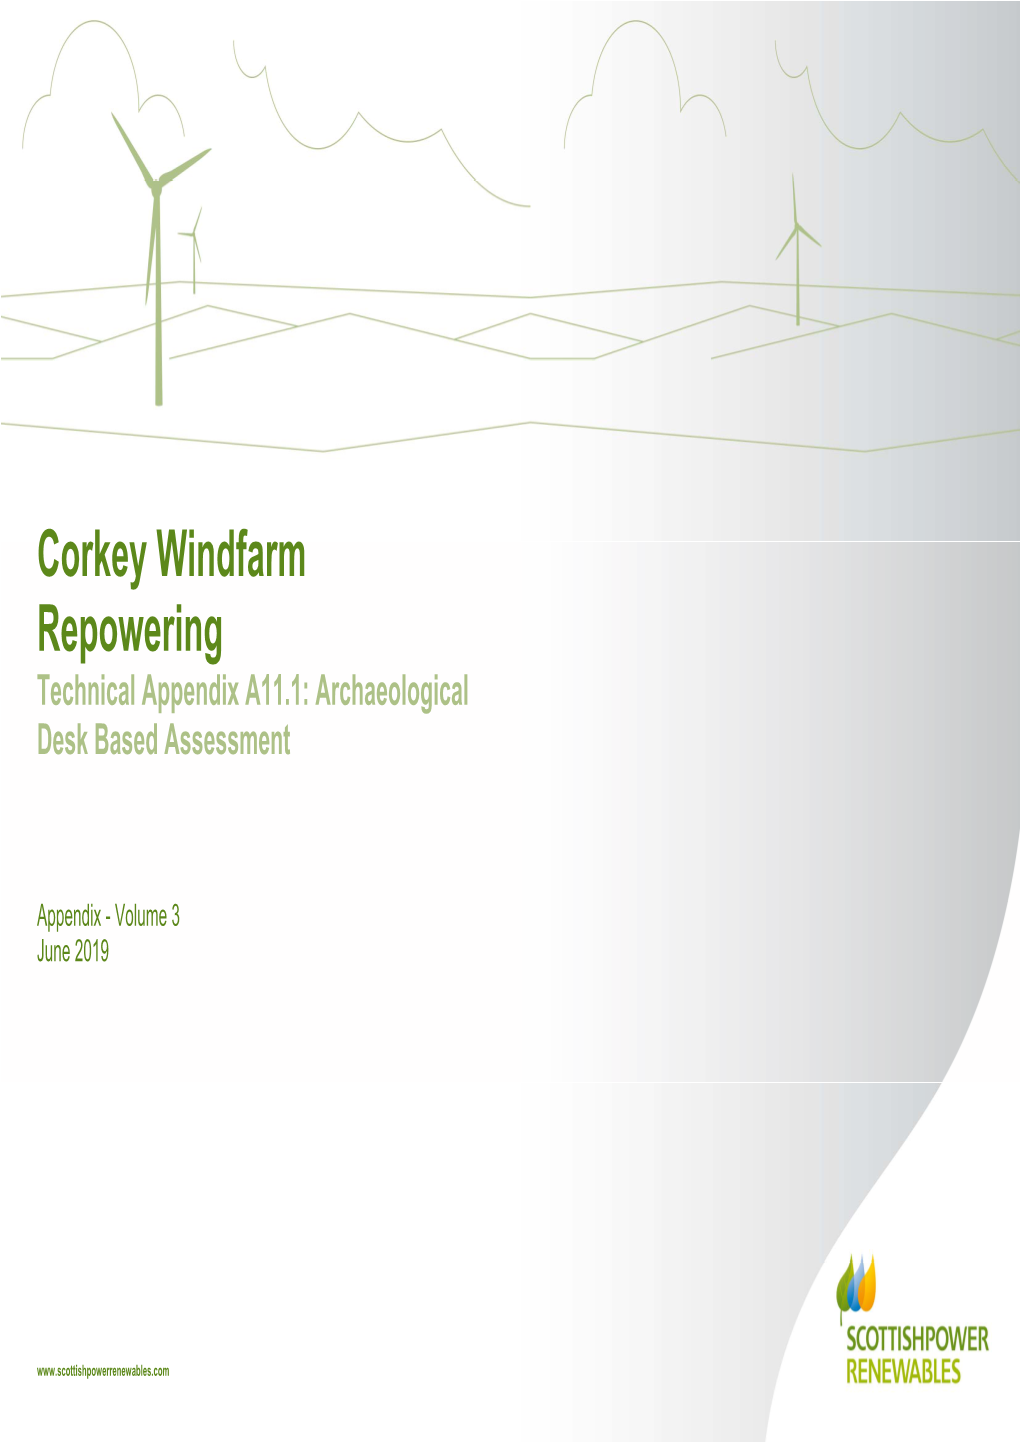 Corkey Windfarm Repowering Technical Appendix A11.1: Archaeological Desk Based Assessment